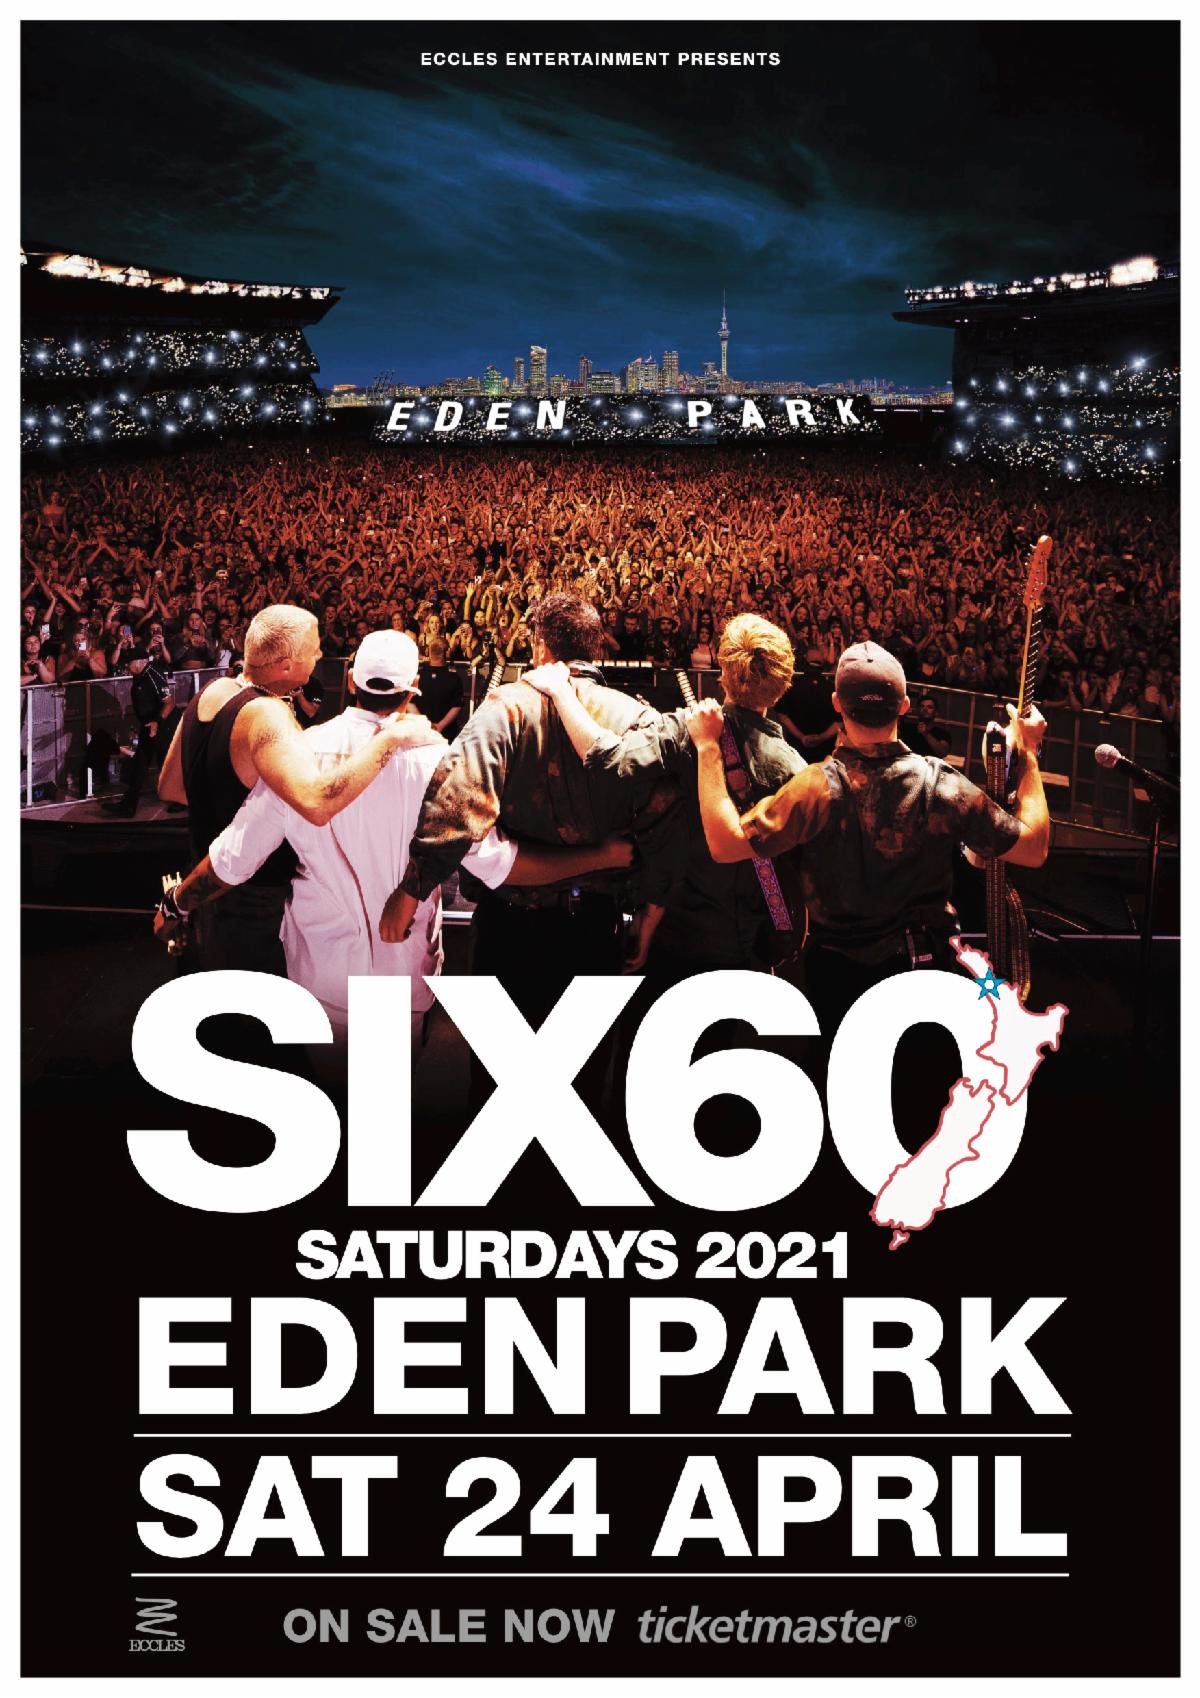 New Zealand’s SIX60 Confirm World’s Largest Concert In Over A Year